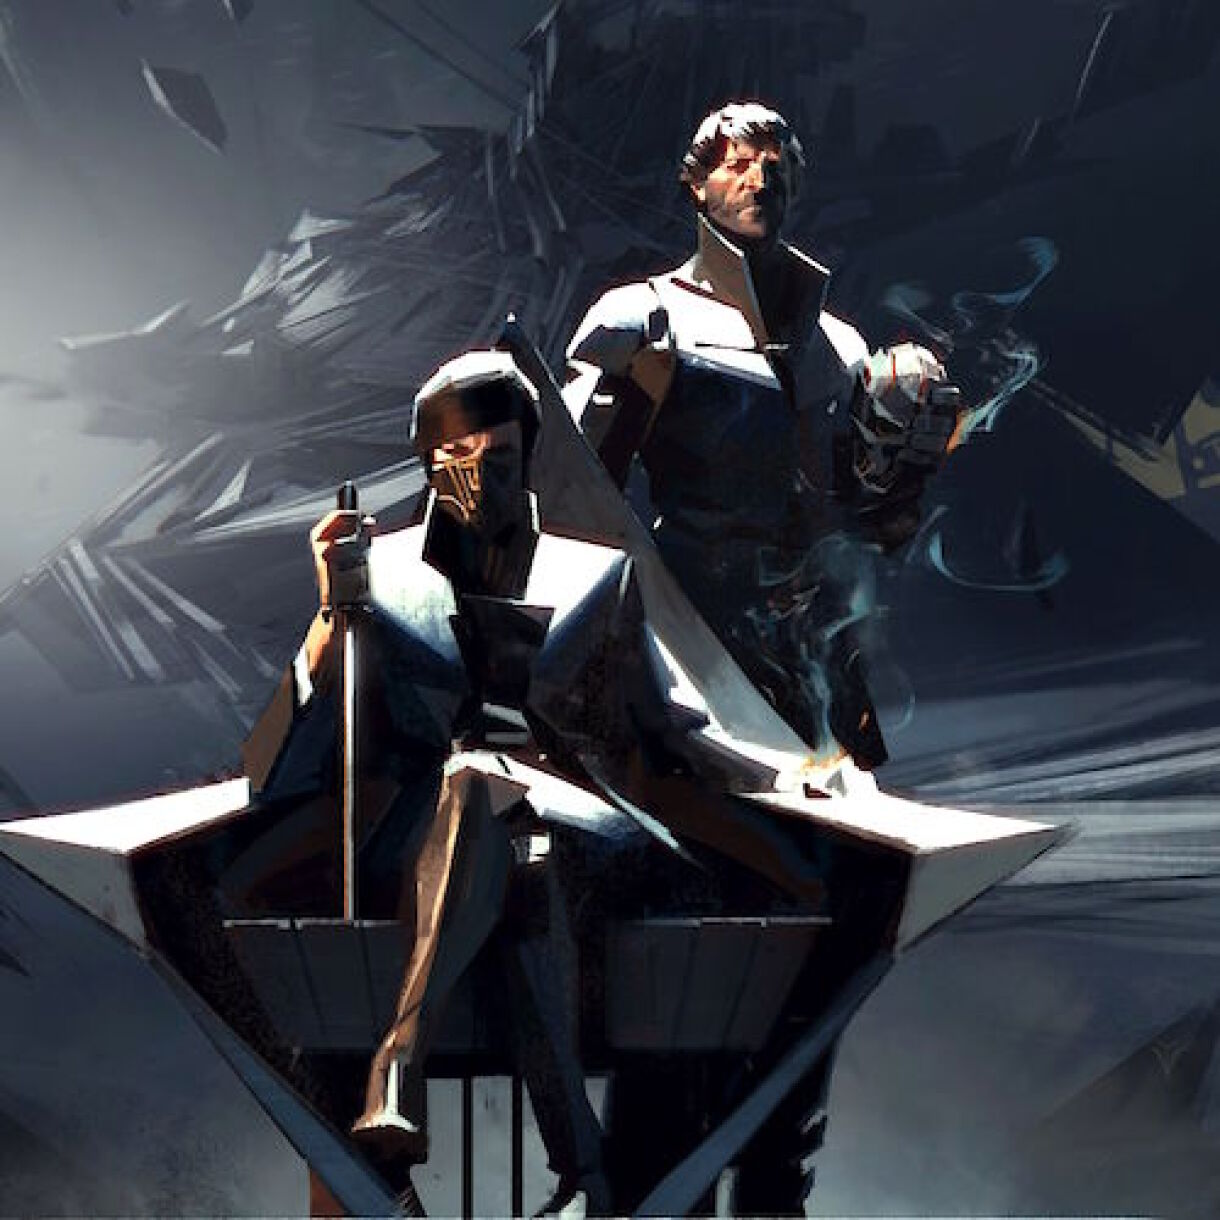 Dishonored 2 Gameplay at E3 2016 